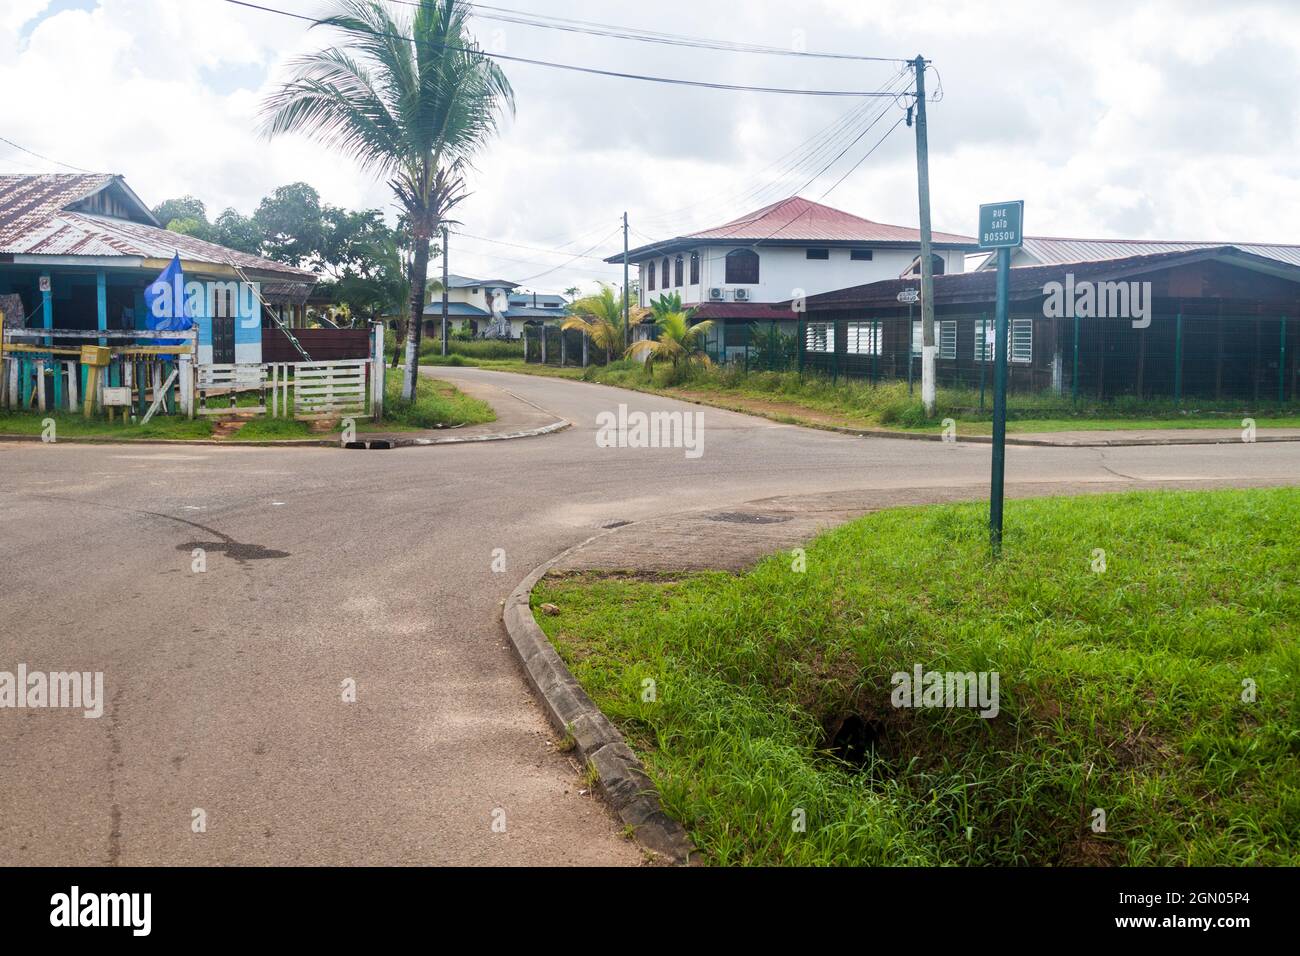 Street in Saint-Georges town, French Guiana Stock Photo